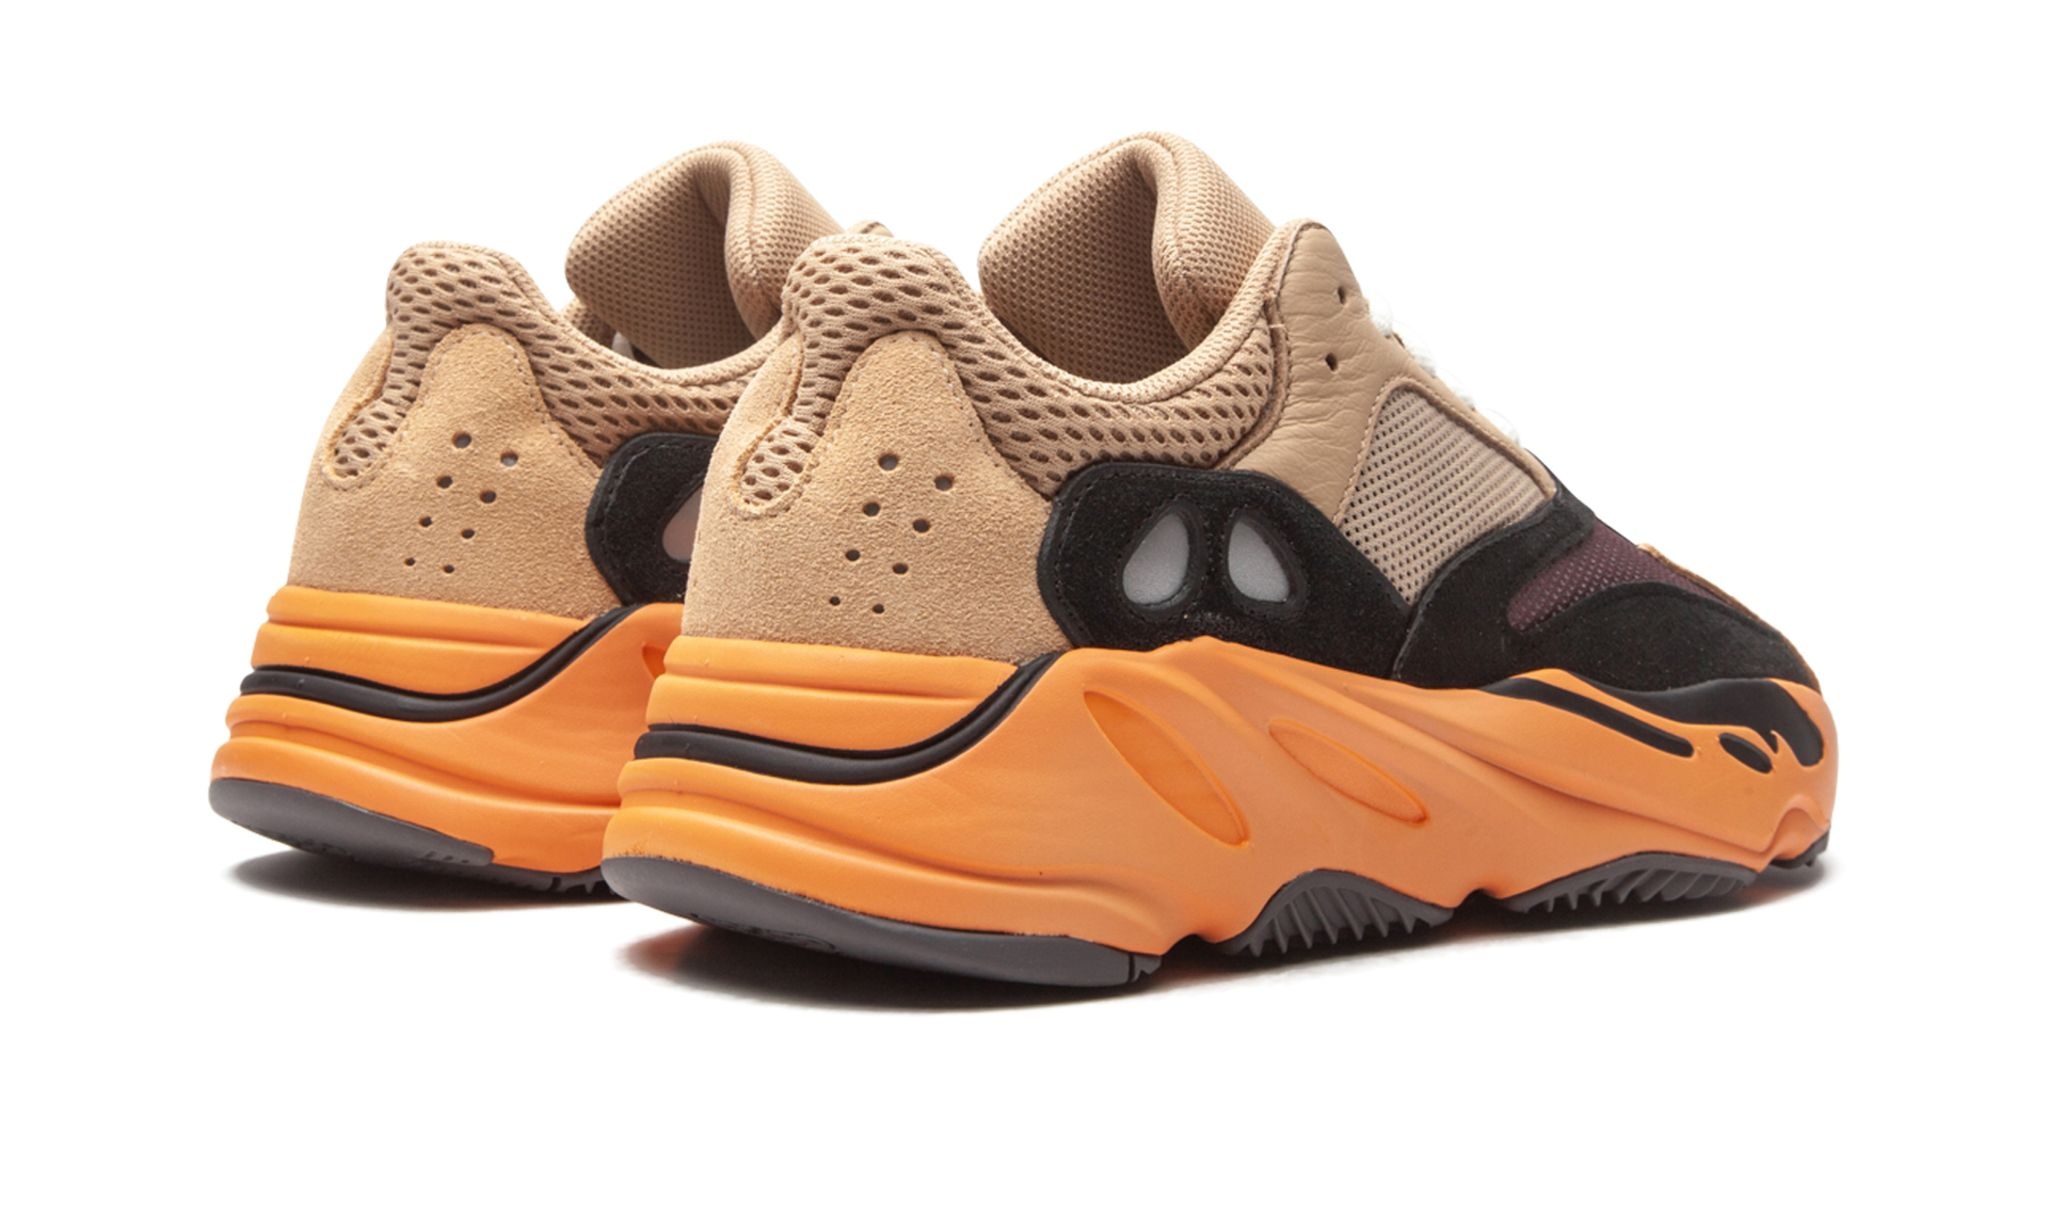 Yeezy Boost 700 "Enflame Amber" - 3